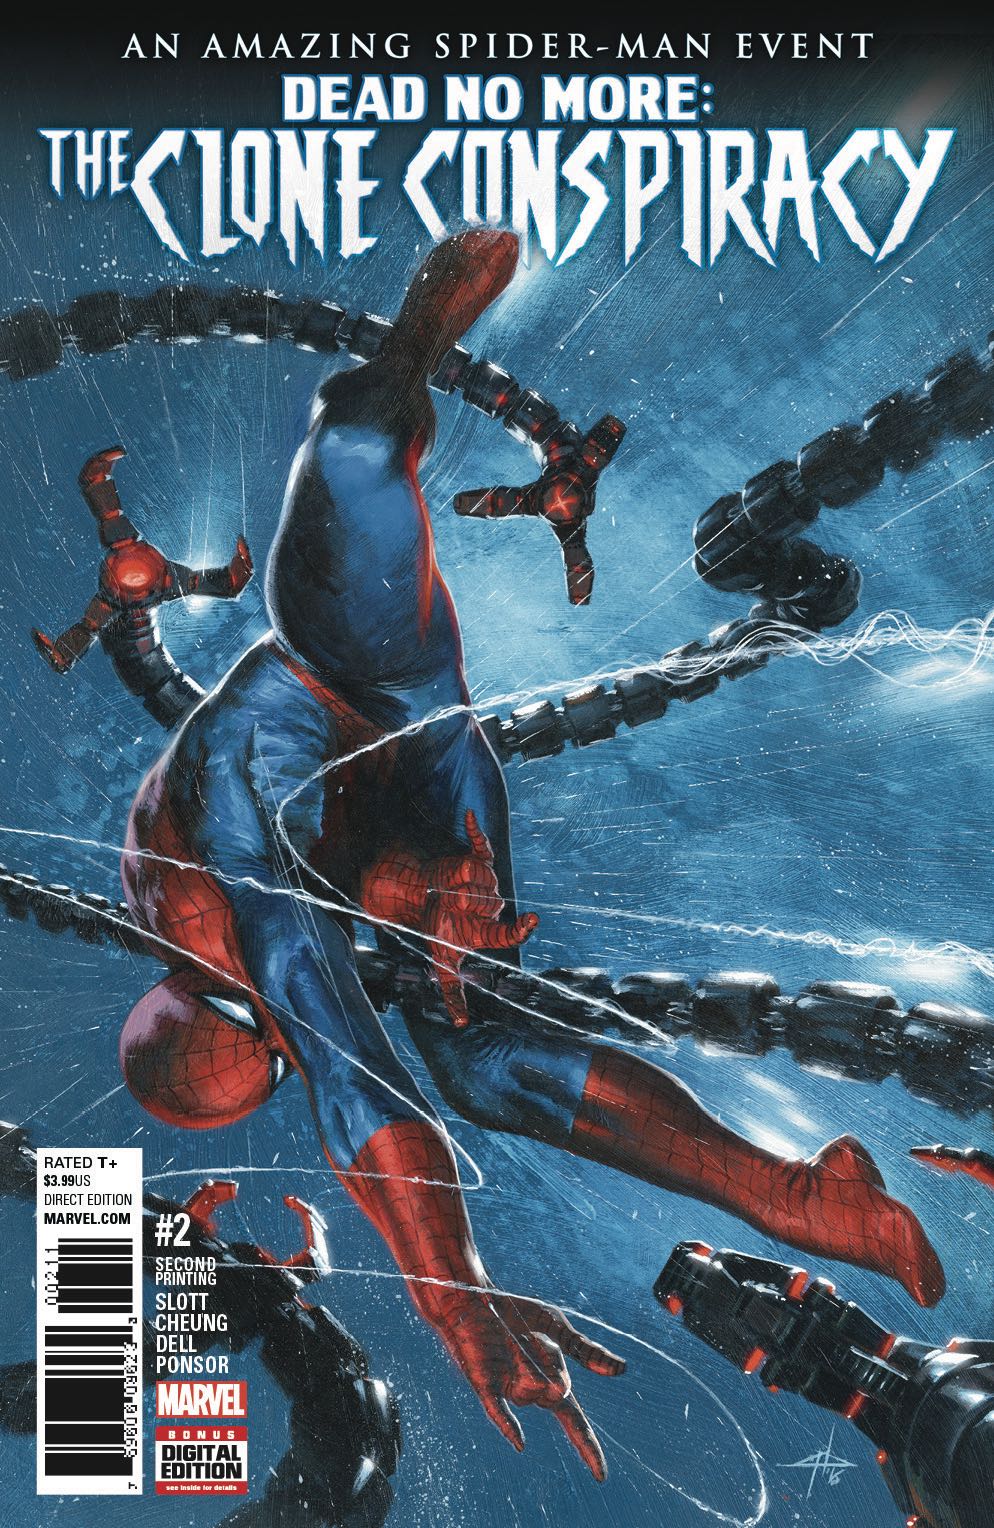 Amazing Spider-Man Dead no More Clone Conspiracy #2 - 2nd Print